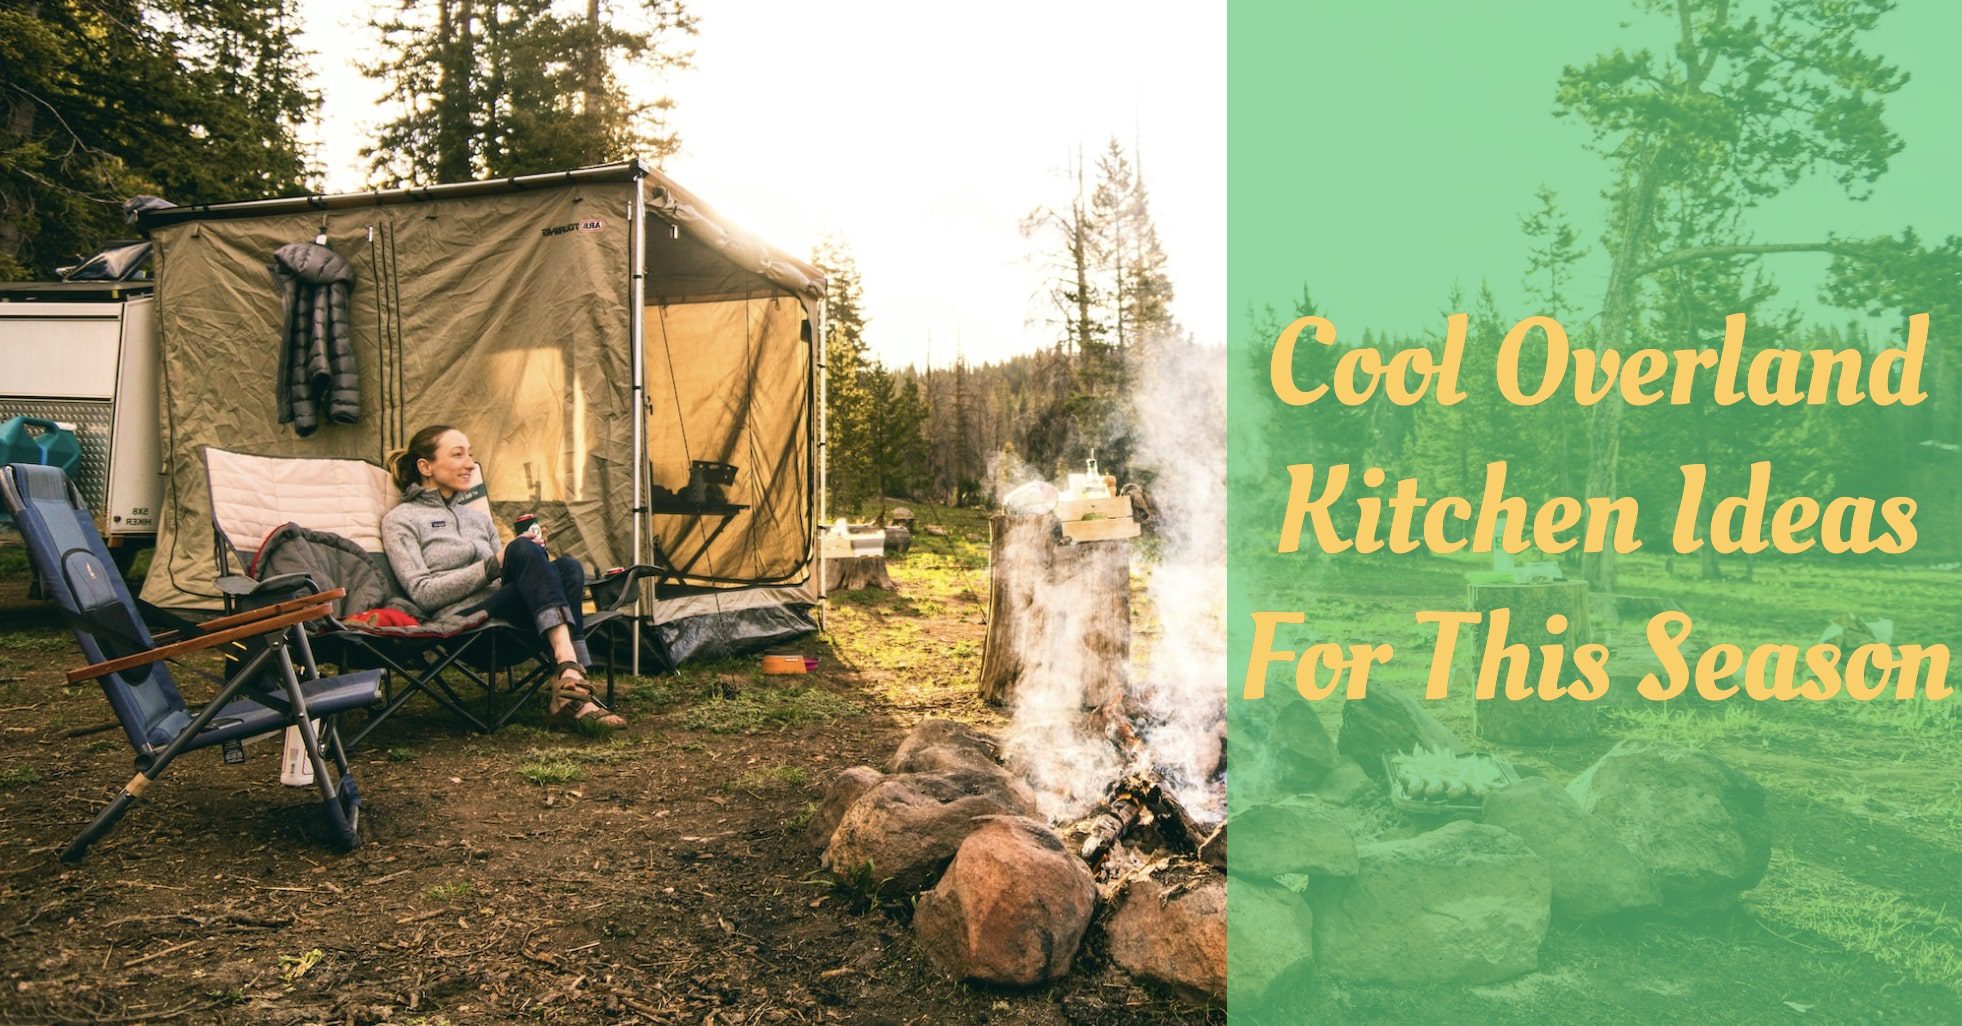 Cool-Overland-Kitchen-Ideas-For-This-Season